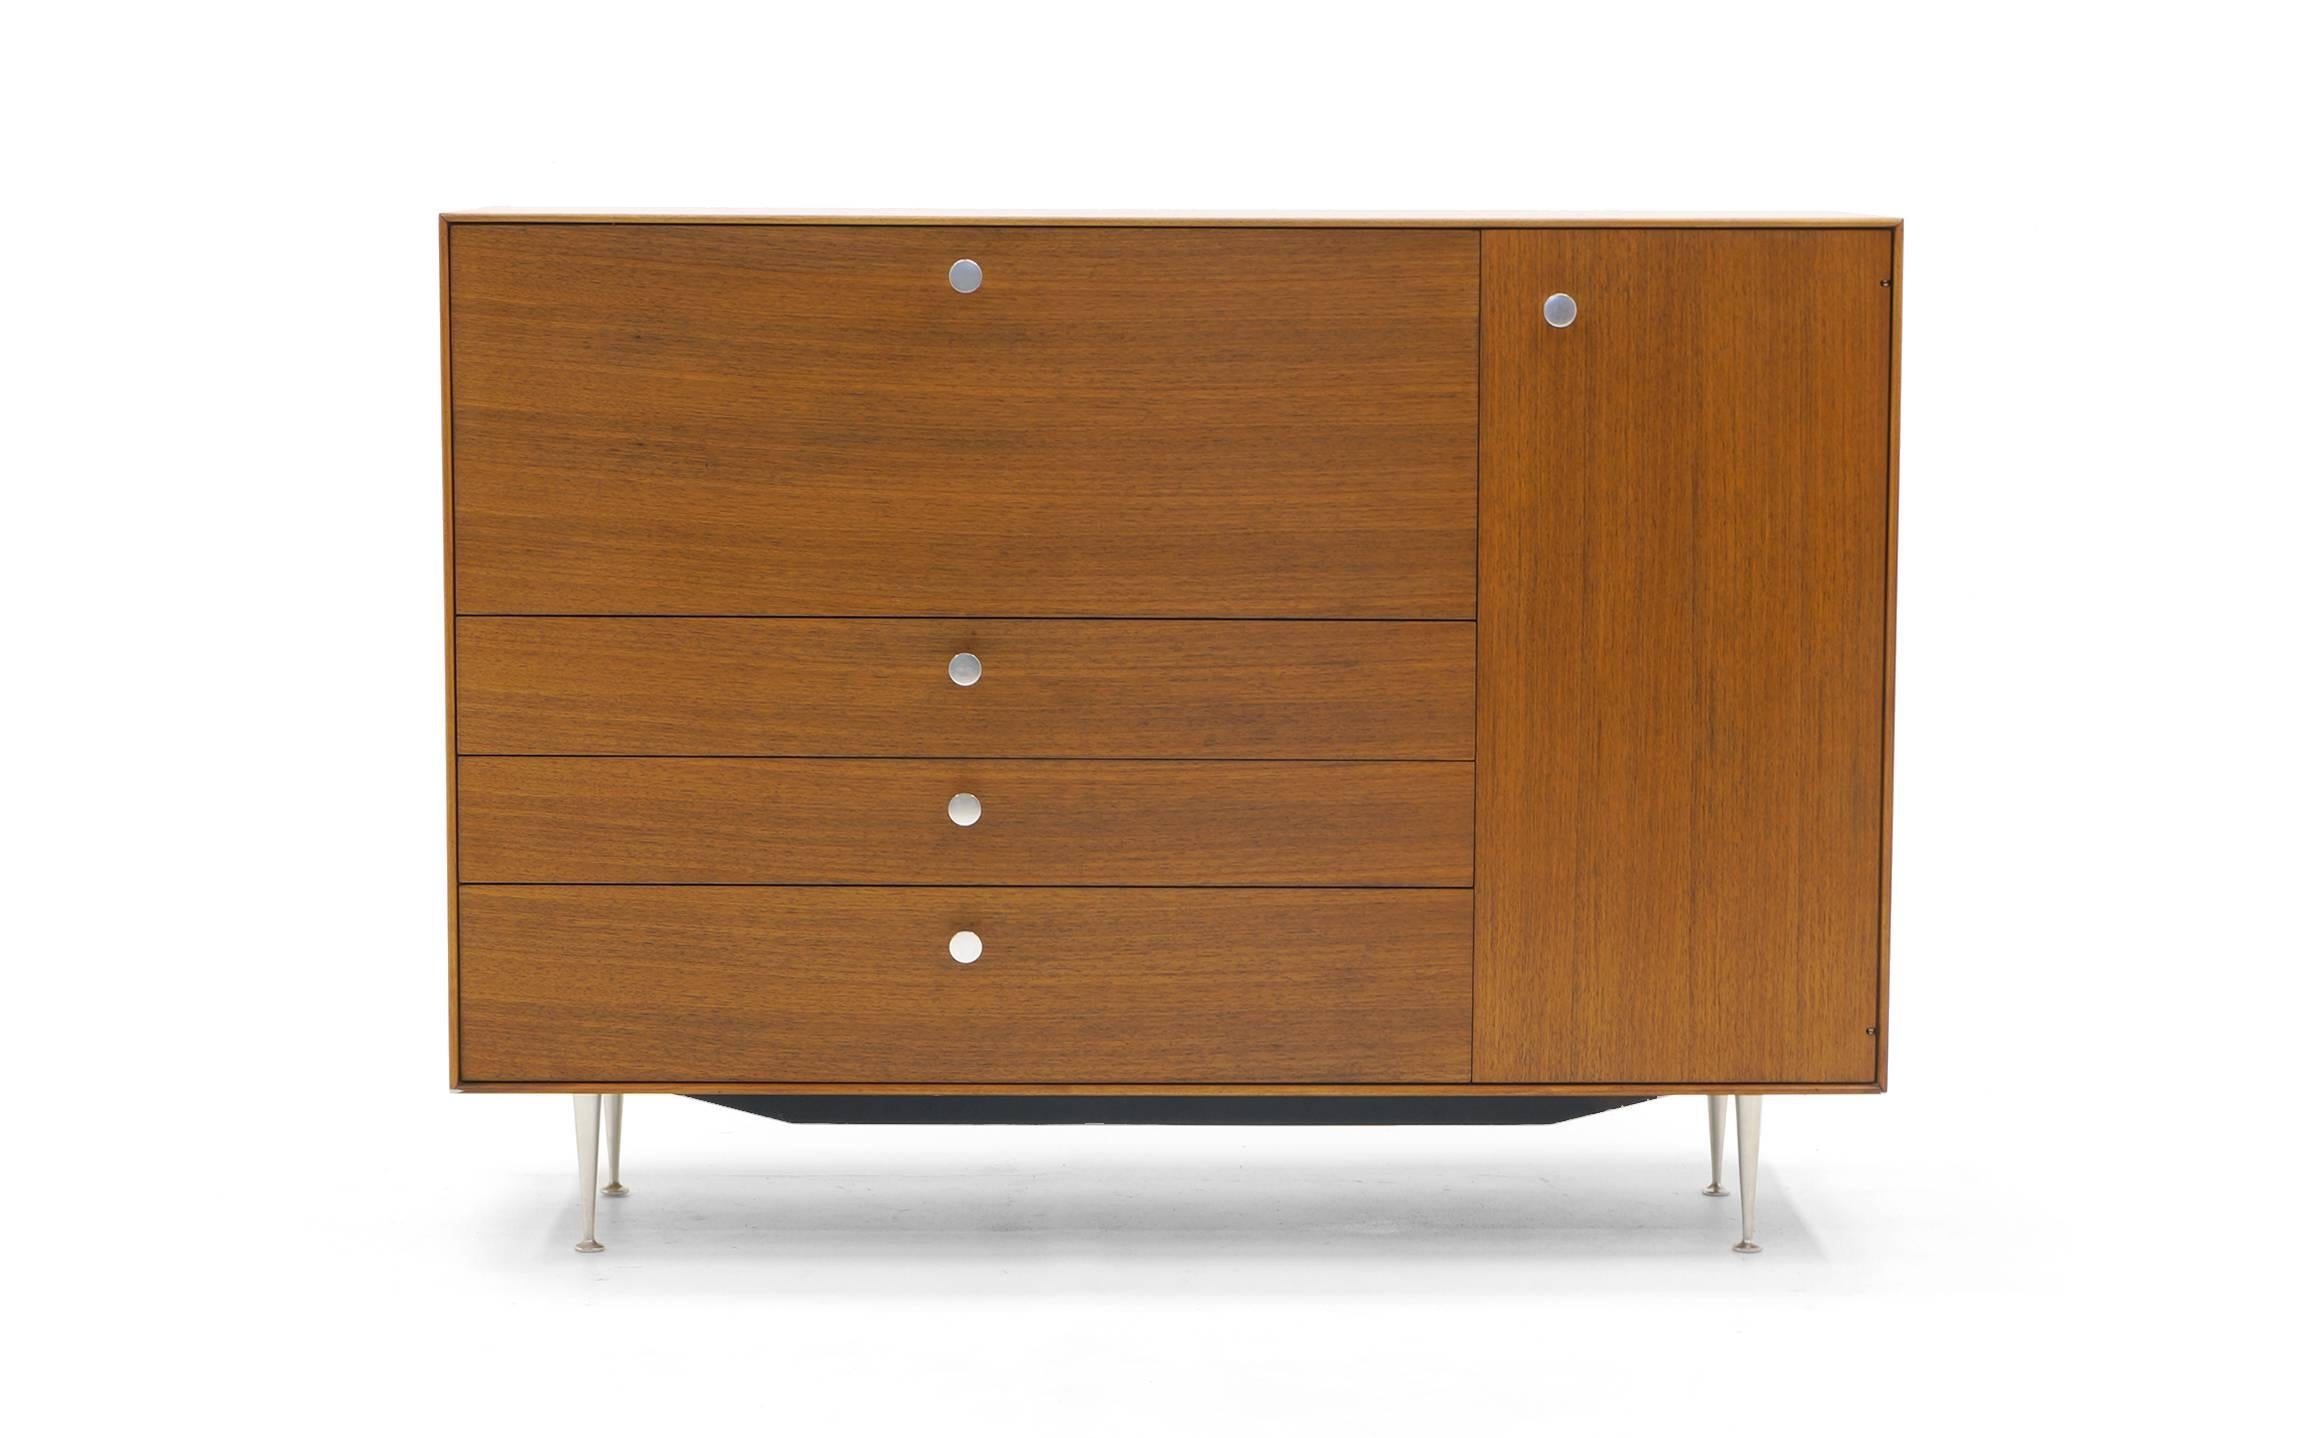 George Nelson for Herman Miller Thin Edge Secretary. Walnut case with case aluminum legs and pulls. Porcelain pulls on the small drawers concealed behind the leather covered drop down desk top. This is an exceptional example of this versatile